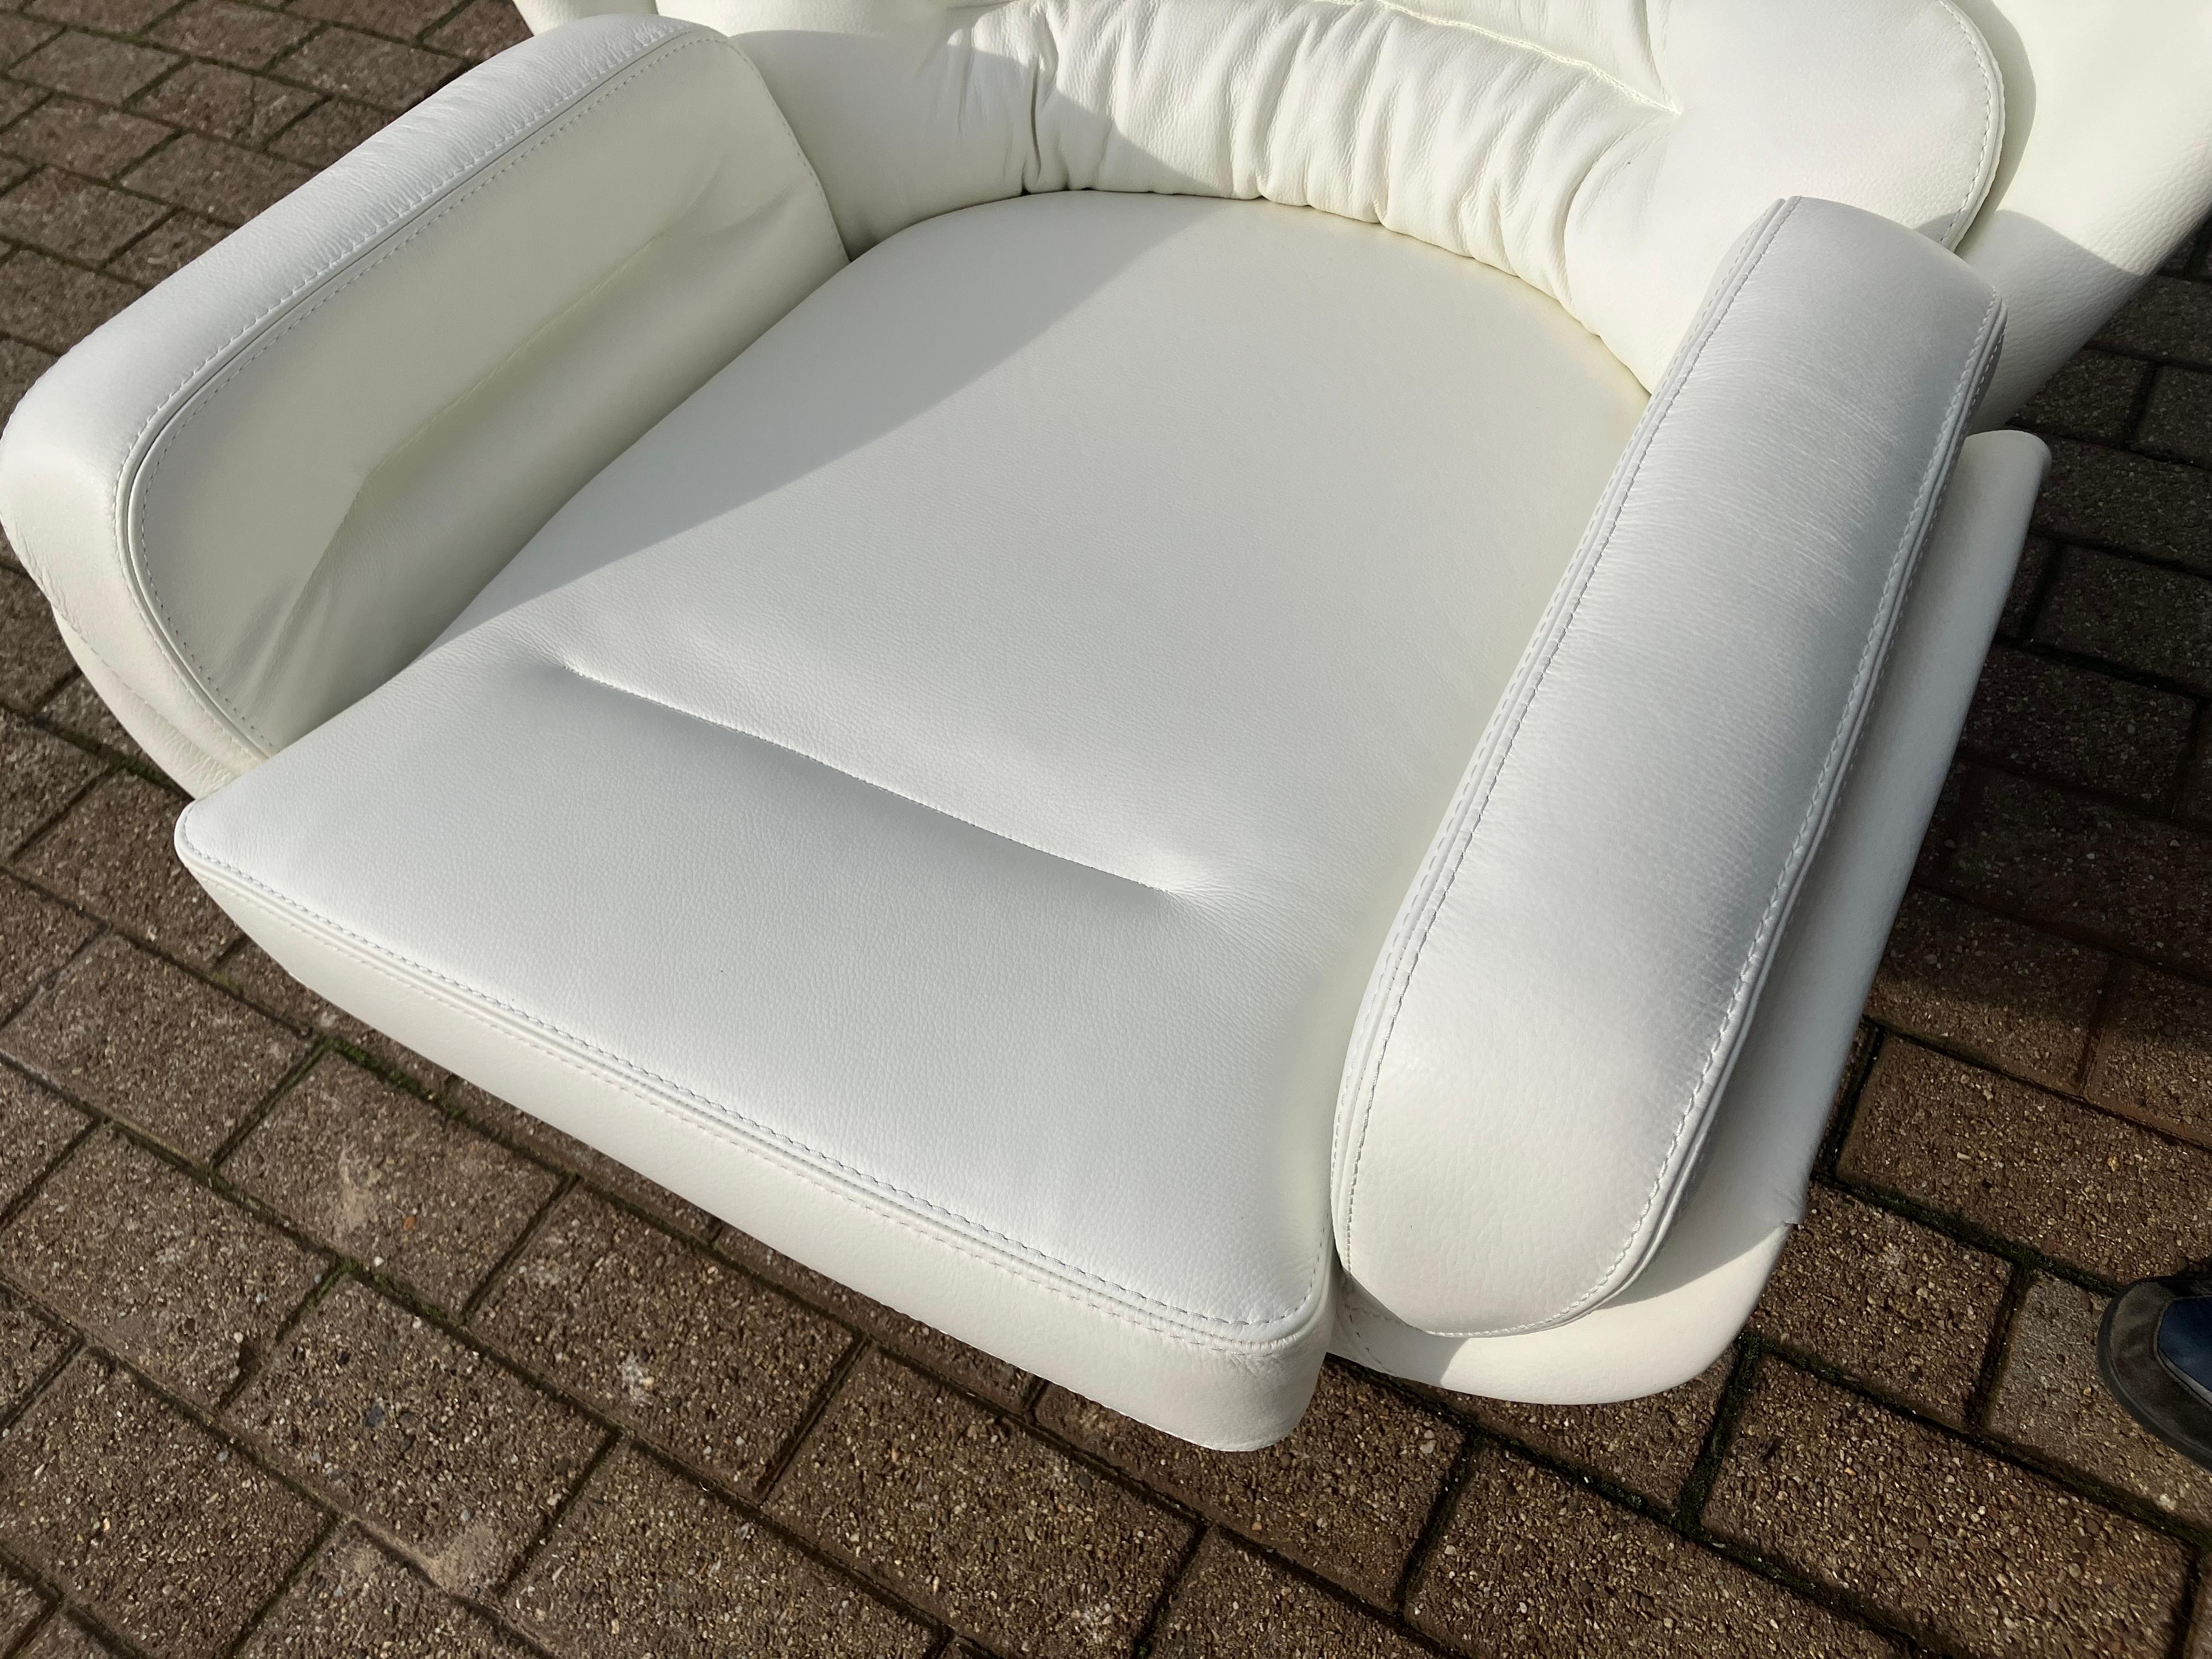 Joe Colombo Elda Chair in White leather and white fiberglass  For Sale 4